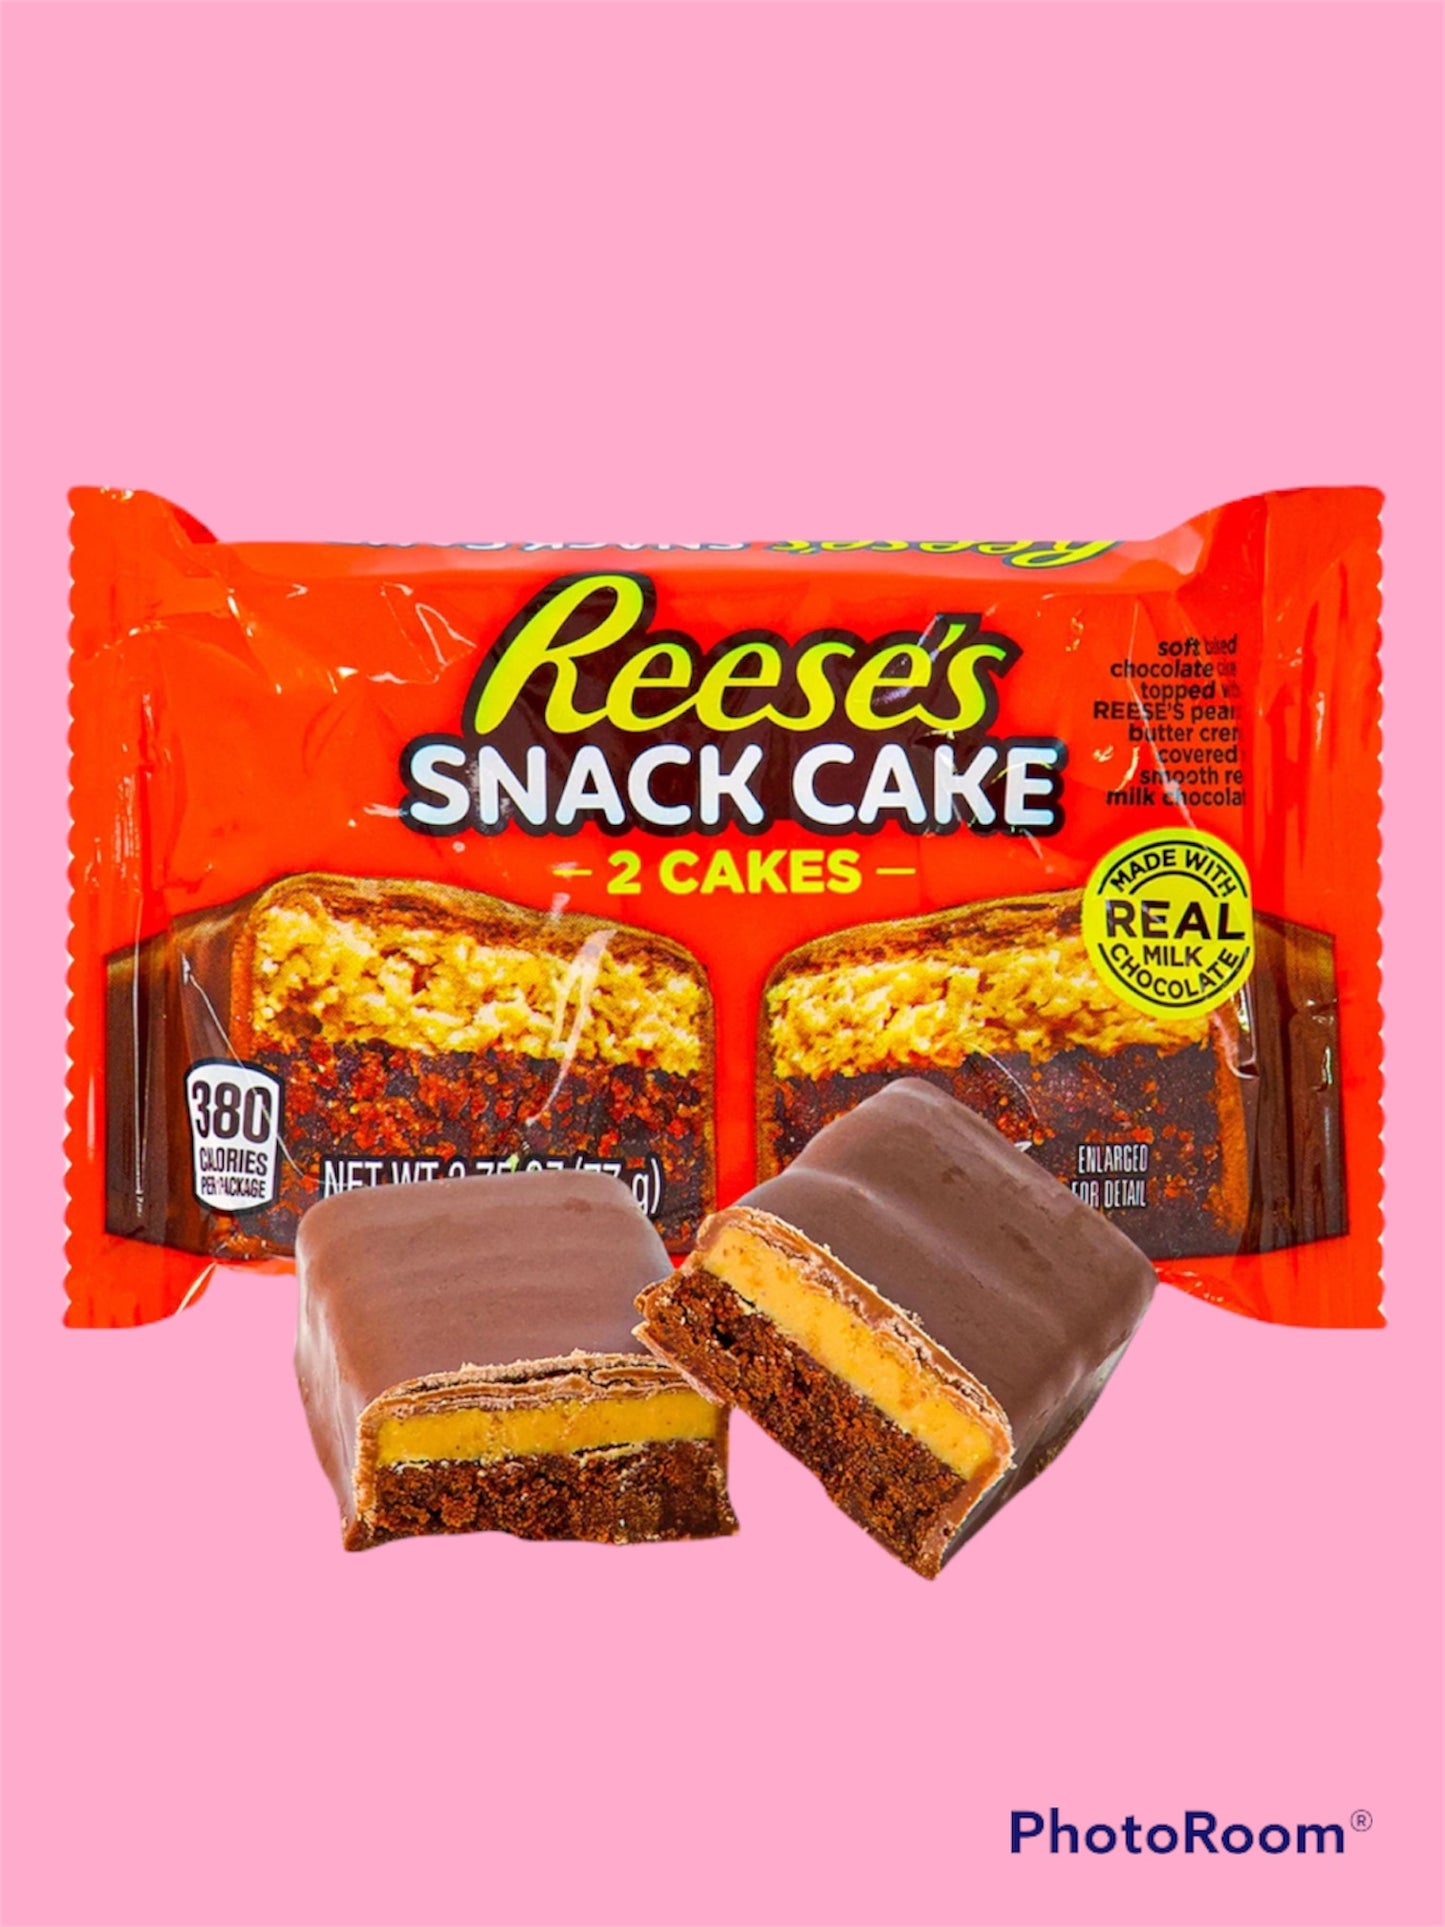 Reese’s Snack Cake